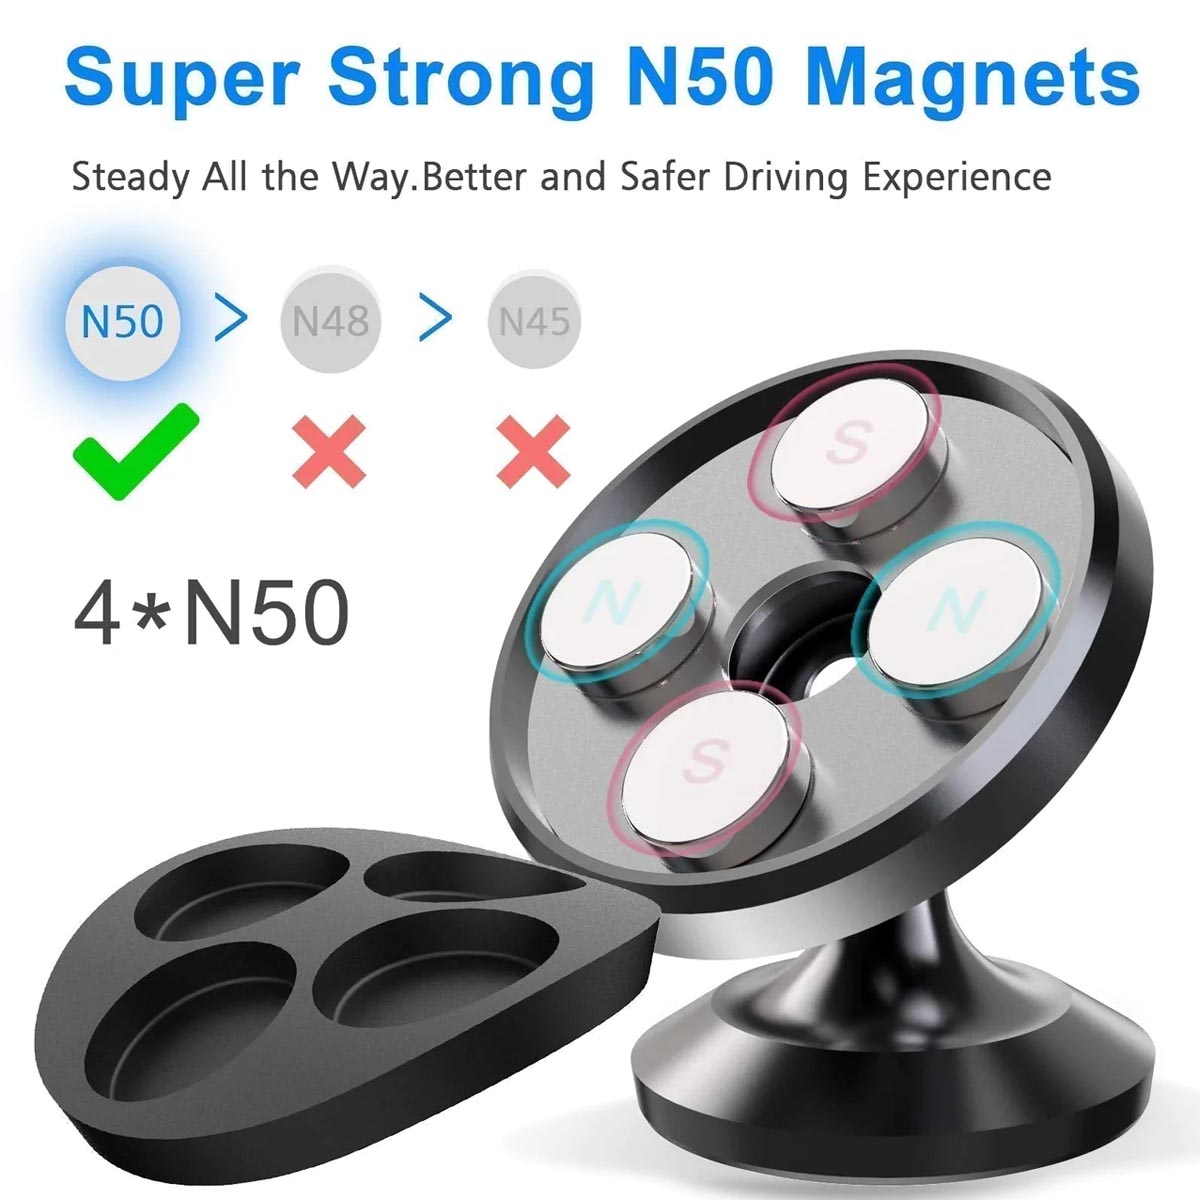 [2 Pack ] Magnetic Phone Mount, Custom For Cars, [ Super Strong Magnet ] [ with 4 Metal Plate ] car Magnetic Phone Holder, [ 360° Rotation ] Universal Dashboard car Mount Fits All Cell Phones, Car Accessories LR13982